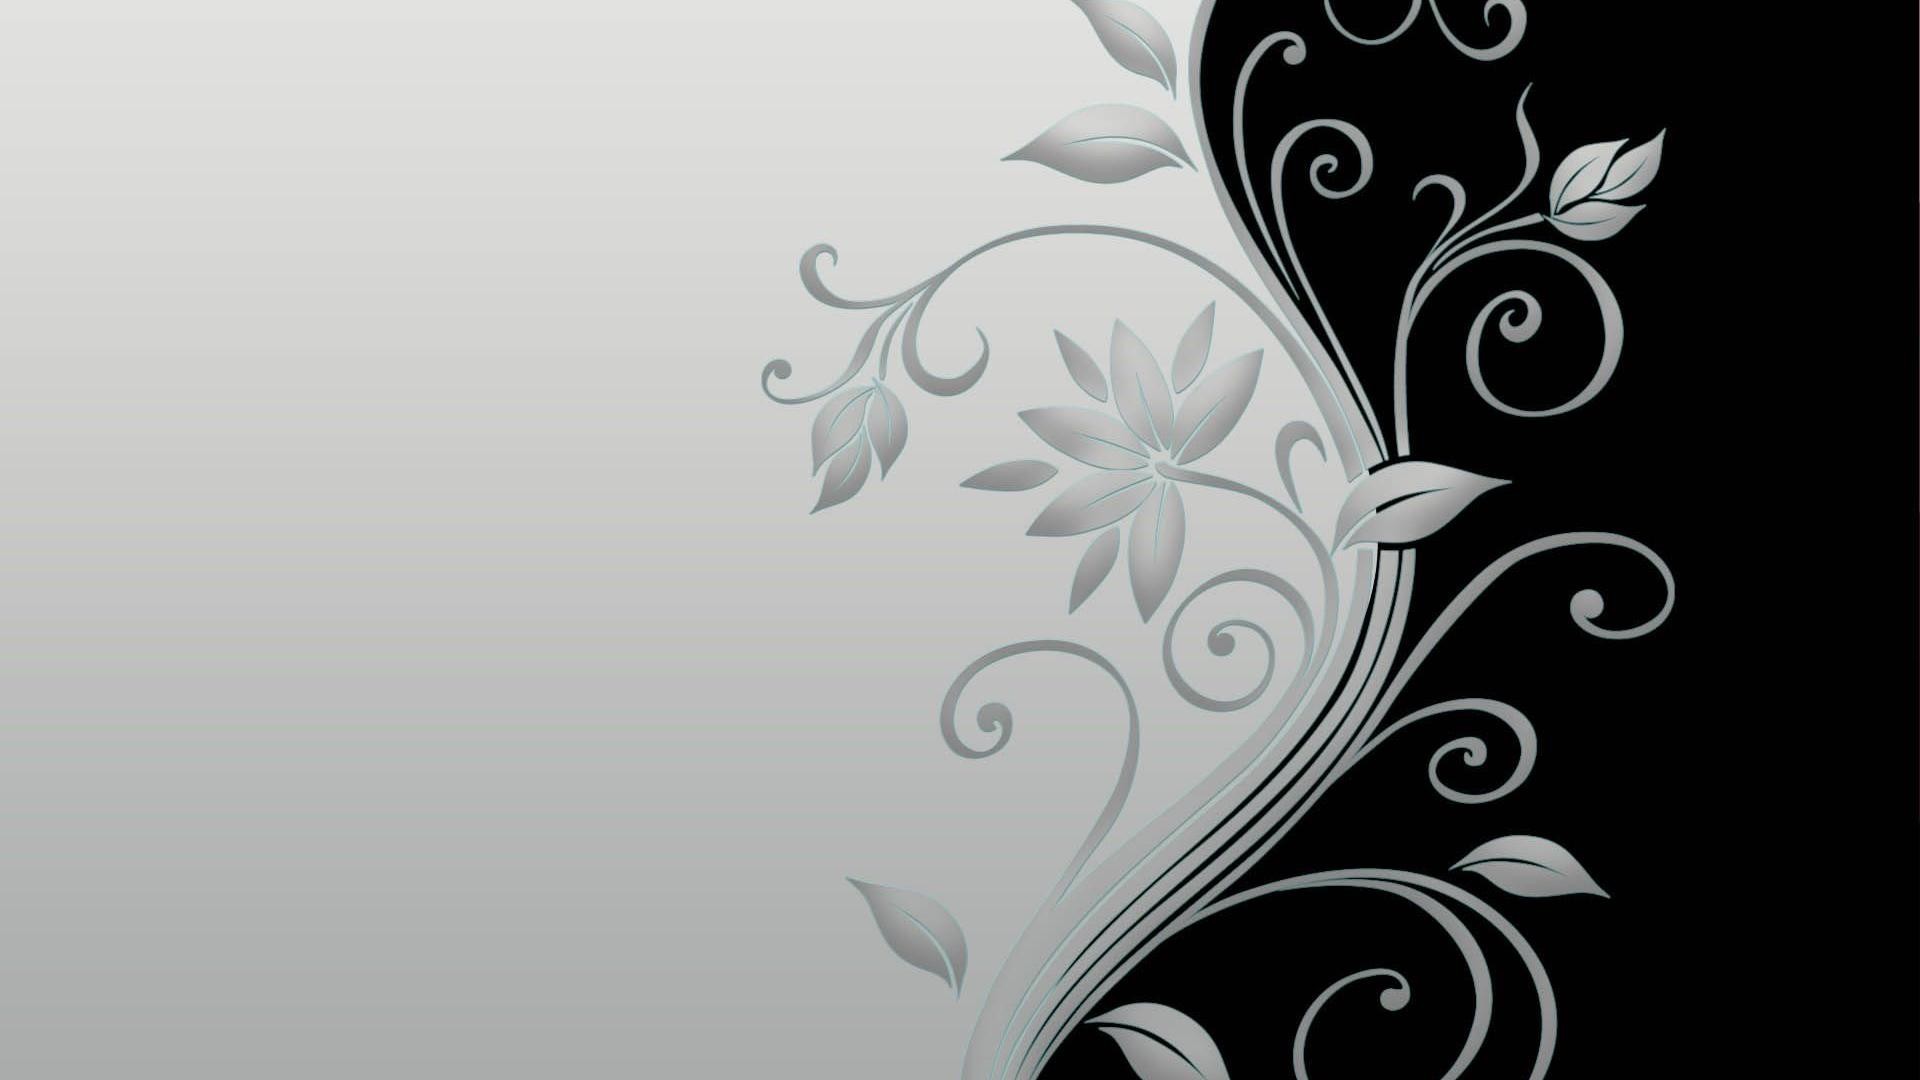 1920x1080 Black And White Floral Wallpaper 15 High Resolution Wallpaper